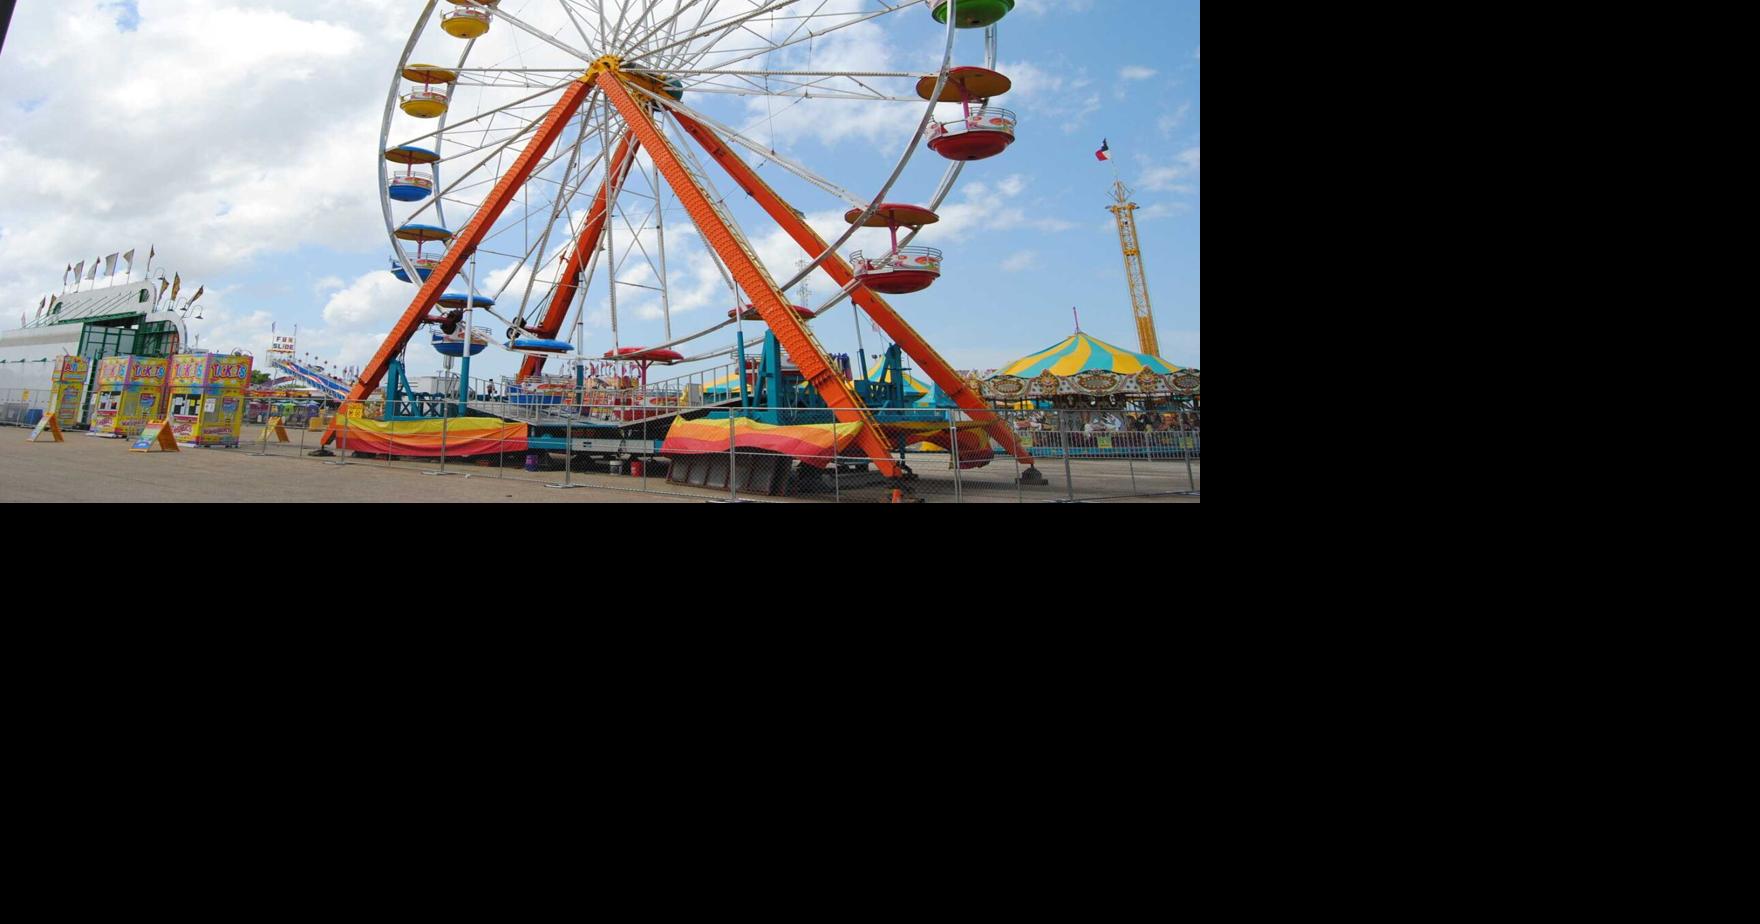 The carnival returns to Killeen Local News